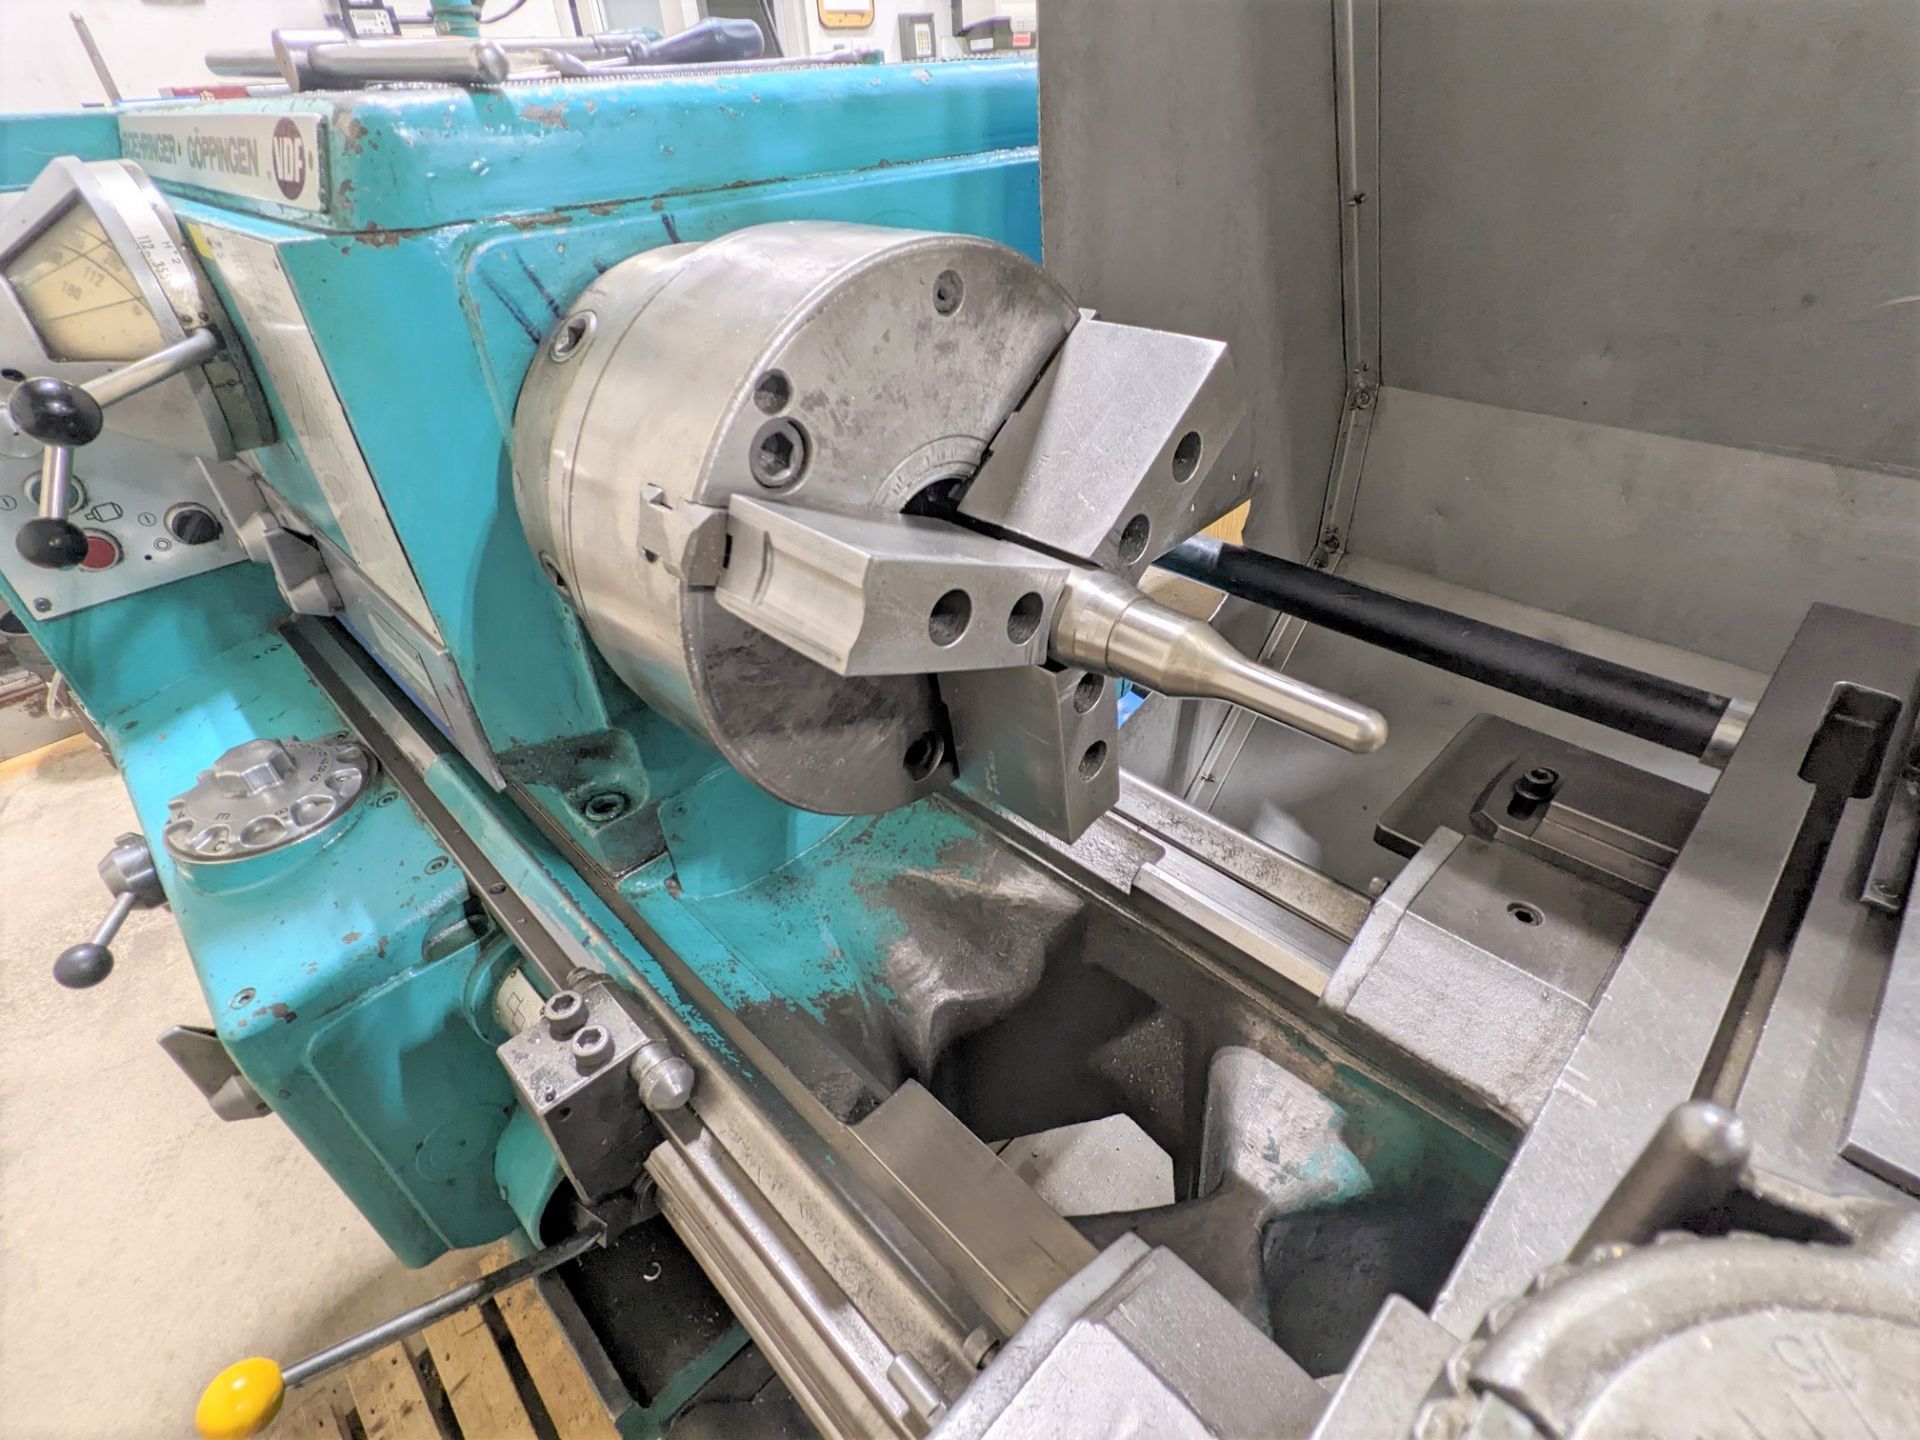 VDF BOEHRINGER GOPPINGEN LATHE, ACU-RITE 2-AXIS DRO, 10” 3-JAW CHUCK, 22” SWING, 60” BED, TOOL POST, - Image 3 of 24